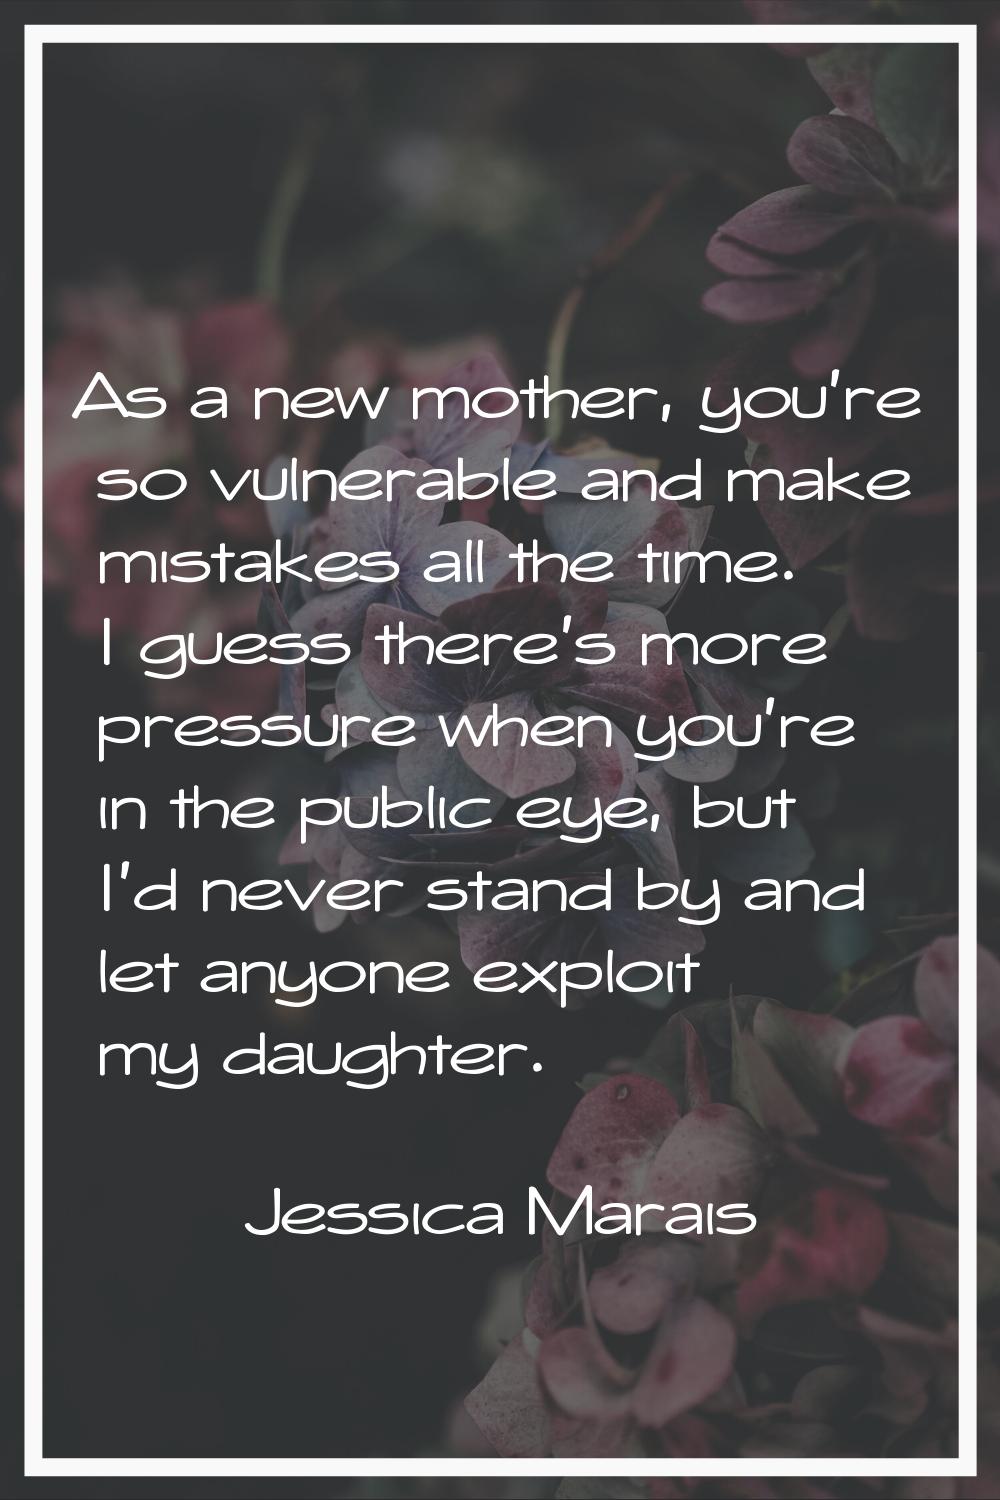 As a new mother, you're so vulnerable and make mistakes all the time. I guess there's more pressure